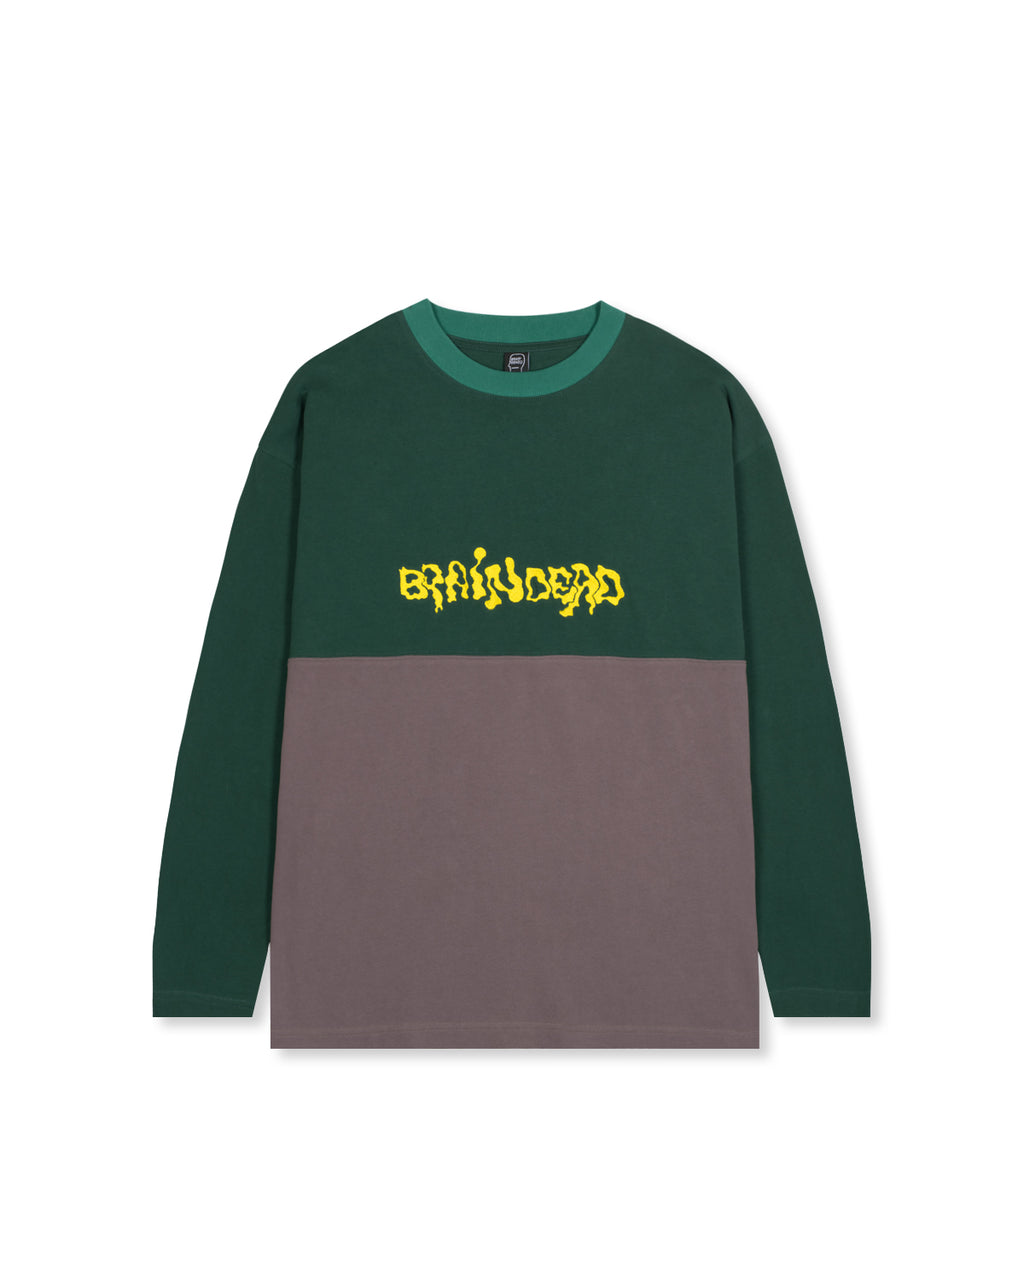 Embroidered Long Sleeve Football Shirt - Forest Green 1